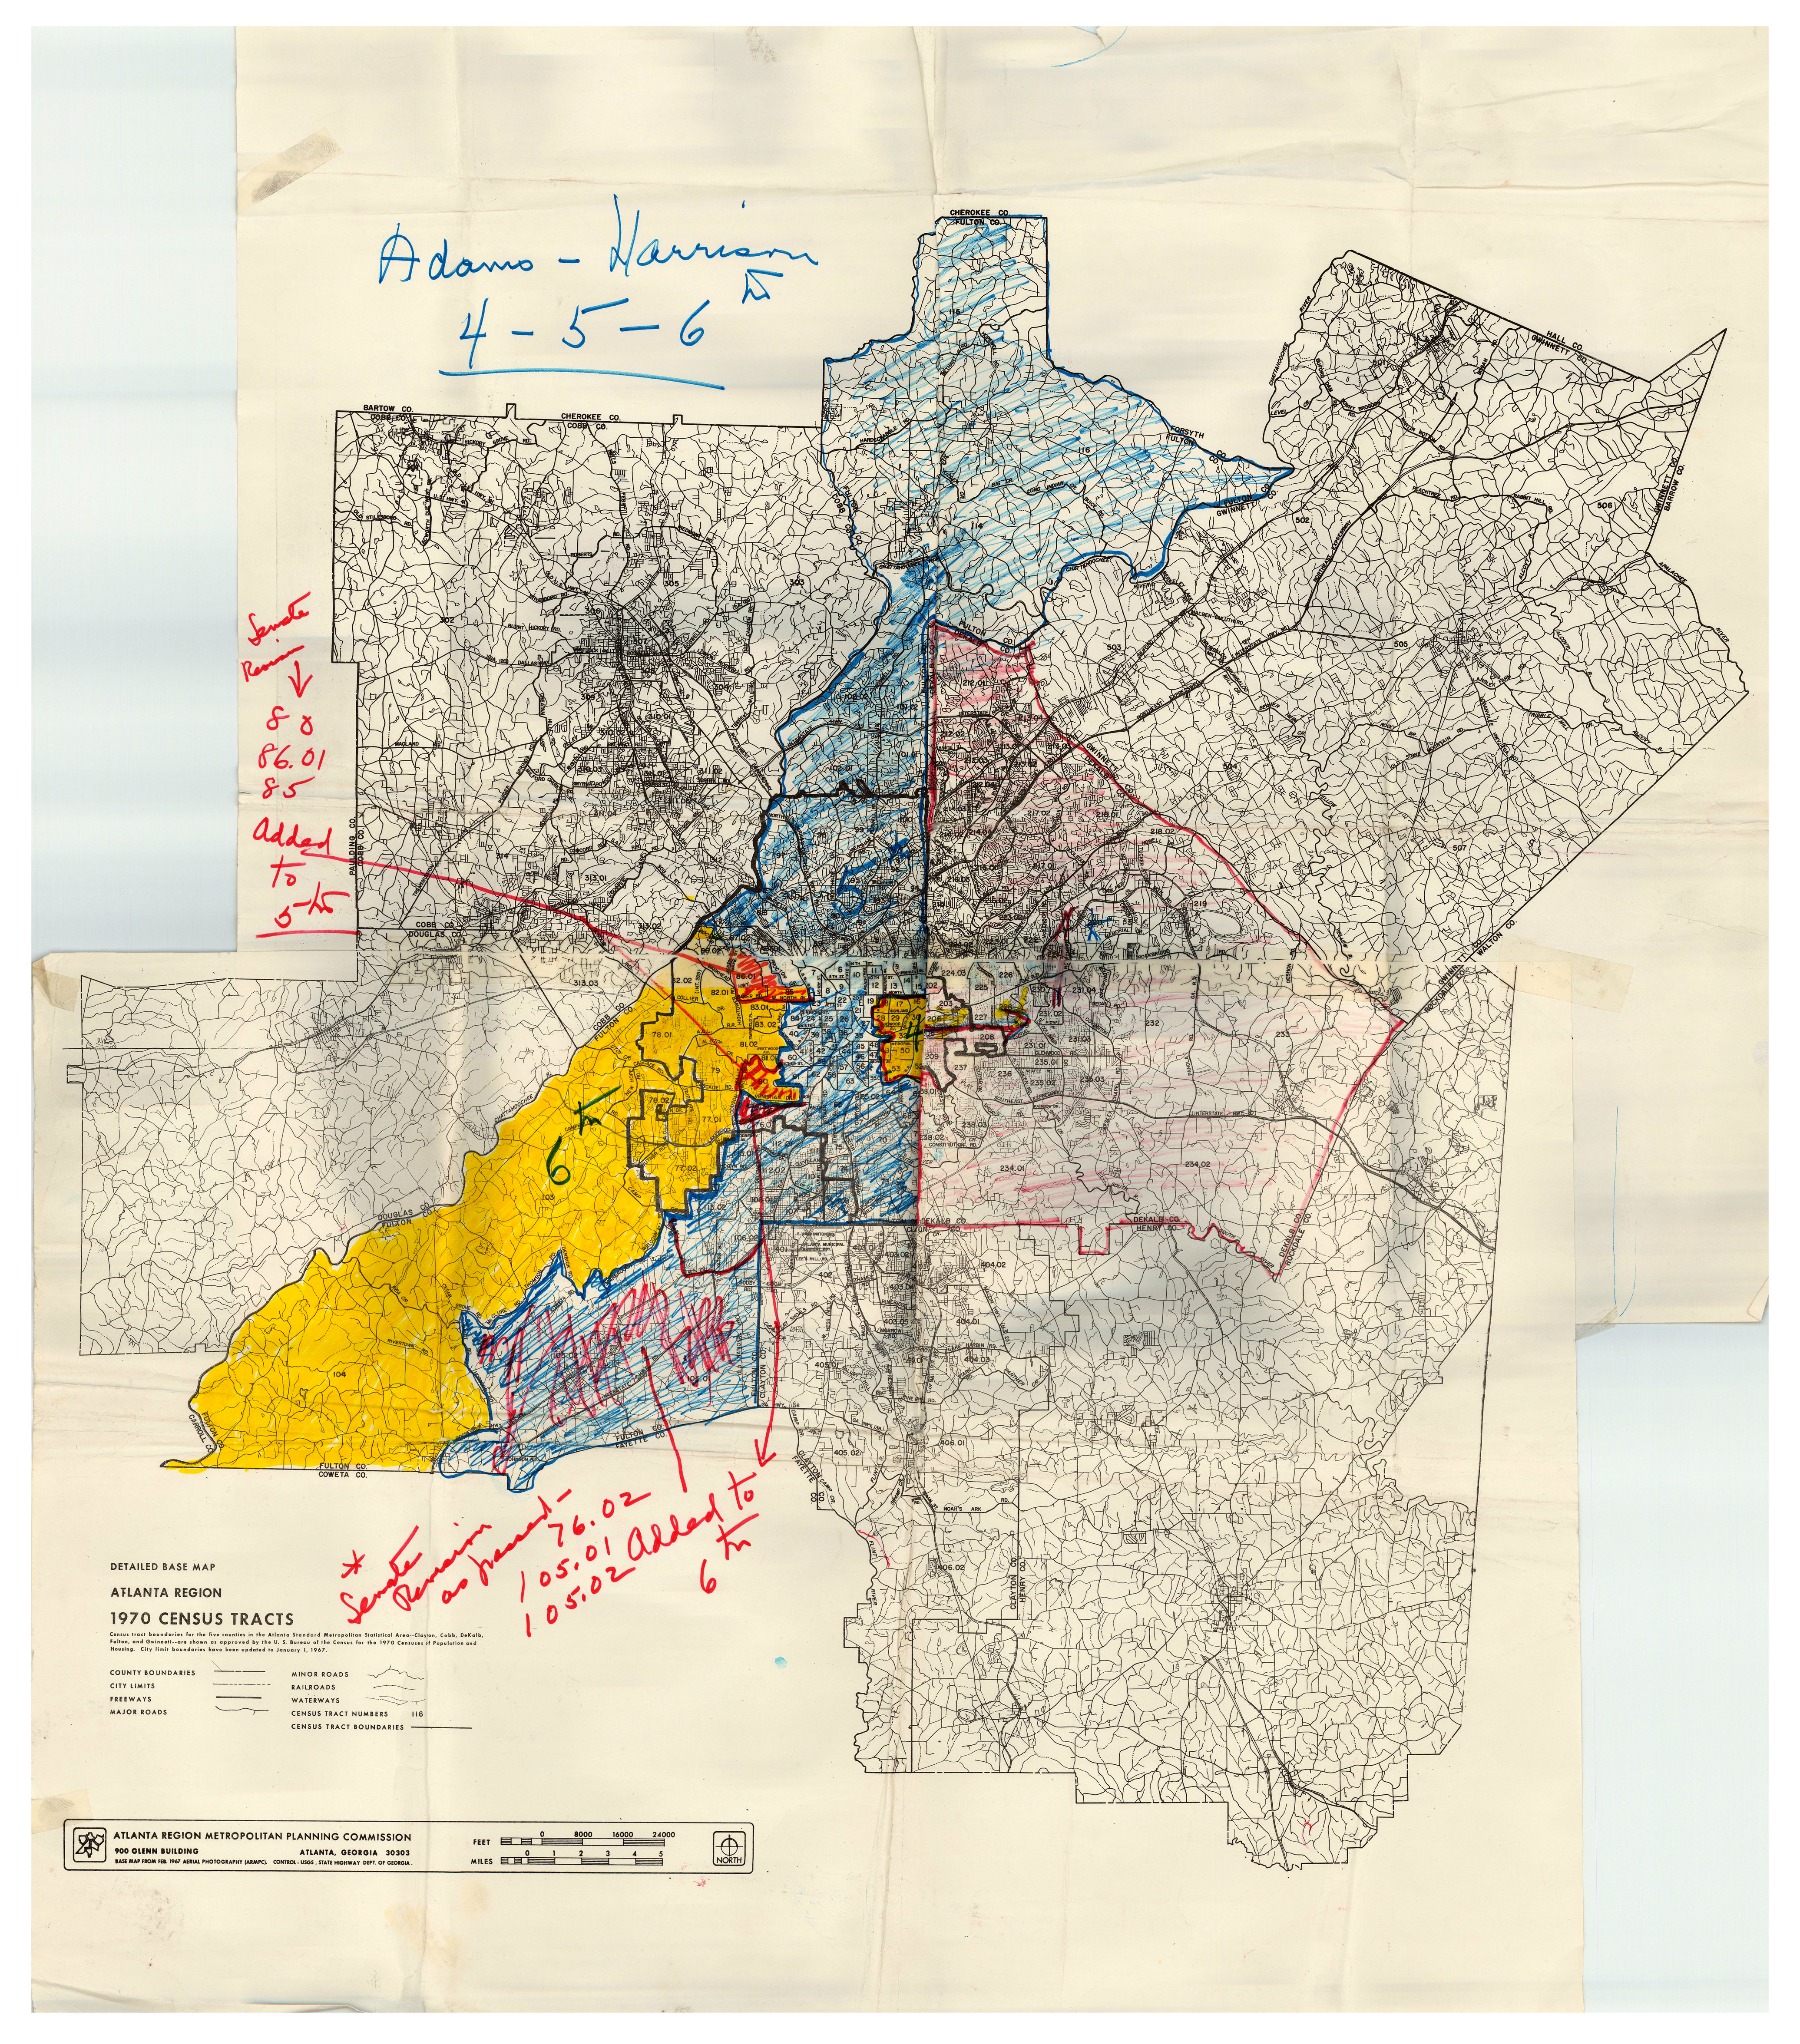 Map of Atlanta Region with 4th, 5th, and 6th Congressional Districts shaded in, 1970. GRACE TOWNS HAMILTON PAPERS. ARCHIVES RESEARCH CENTER. ATLANTA UNIVERSITY CENTER ROBERT W. WOODRUFF LIBRARY.